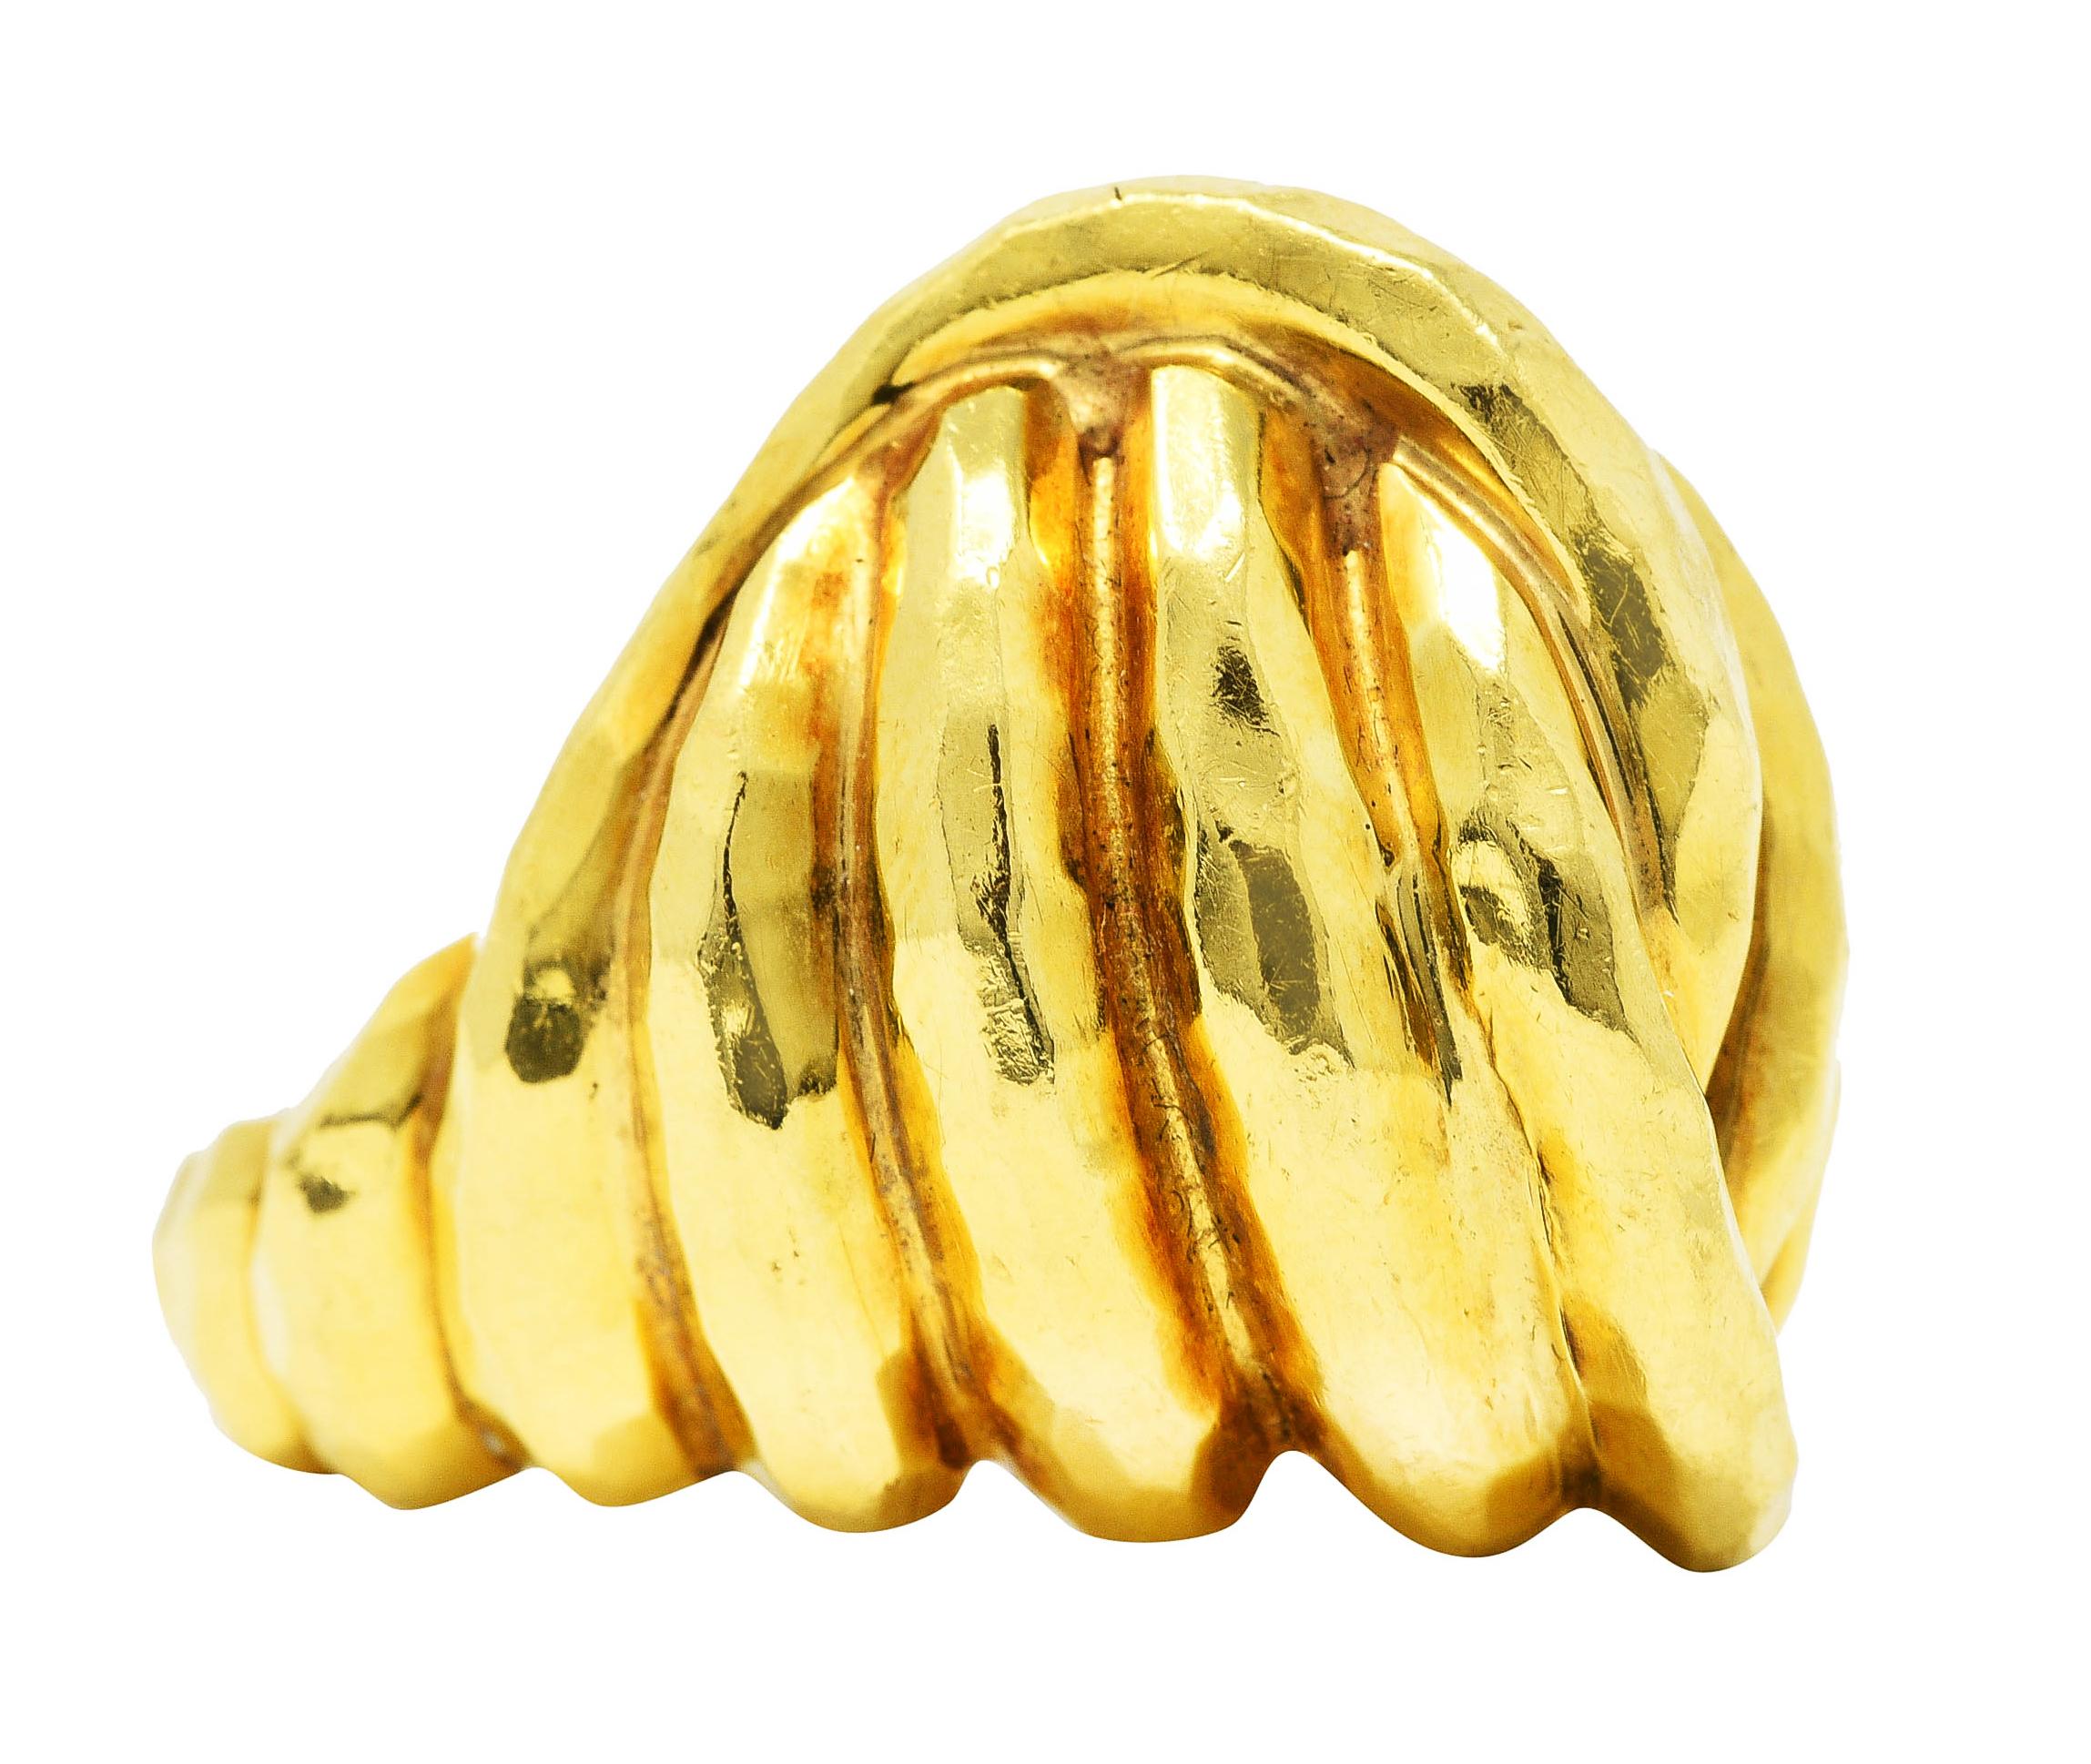 Ring is designed as domed form with grooved segments twisted into knot

Featuring hammered gold texture

Stamped 18k for 18 karat gold

With maker's mark for Henry Dunay

Circa: 1980's - from the Cynnabar collection

Ring size: 6 1/4 and not